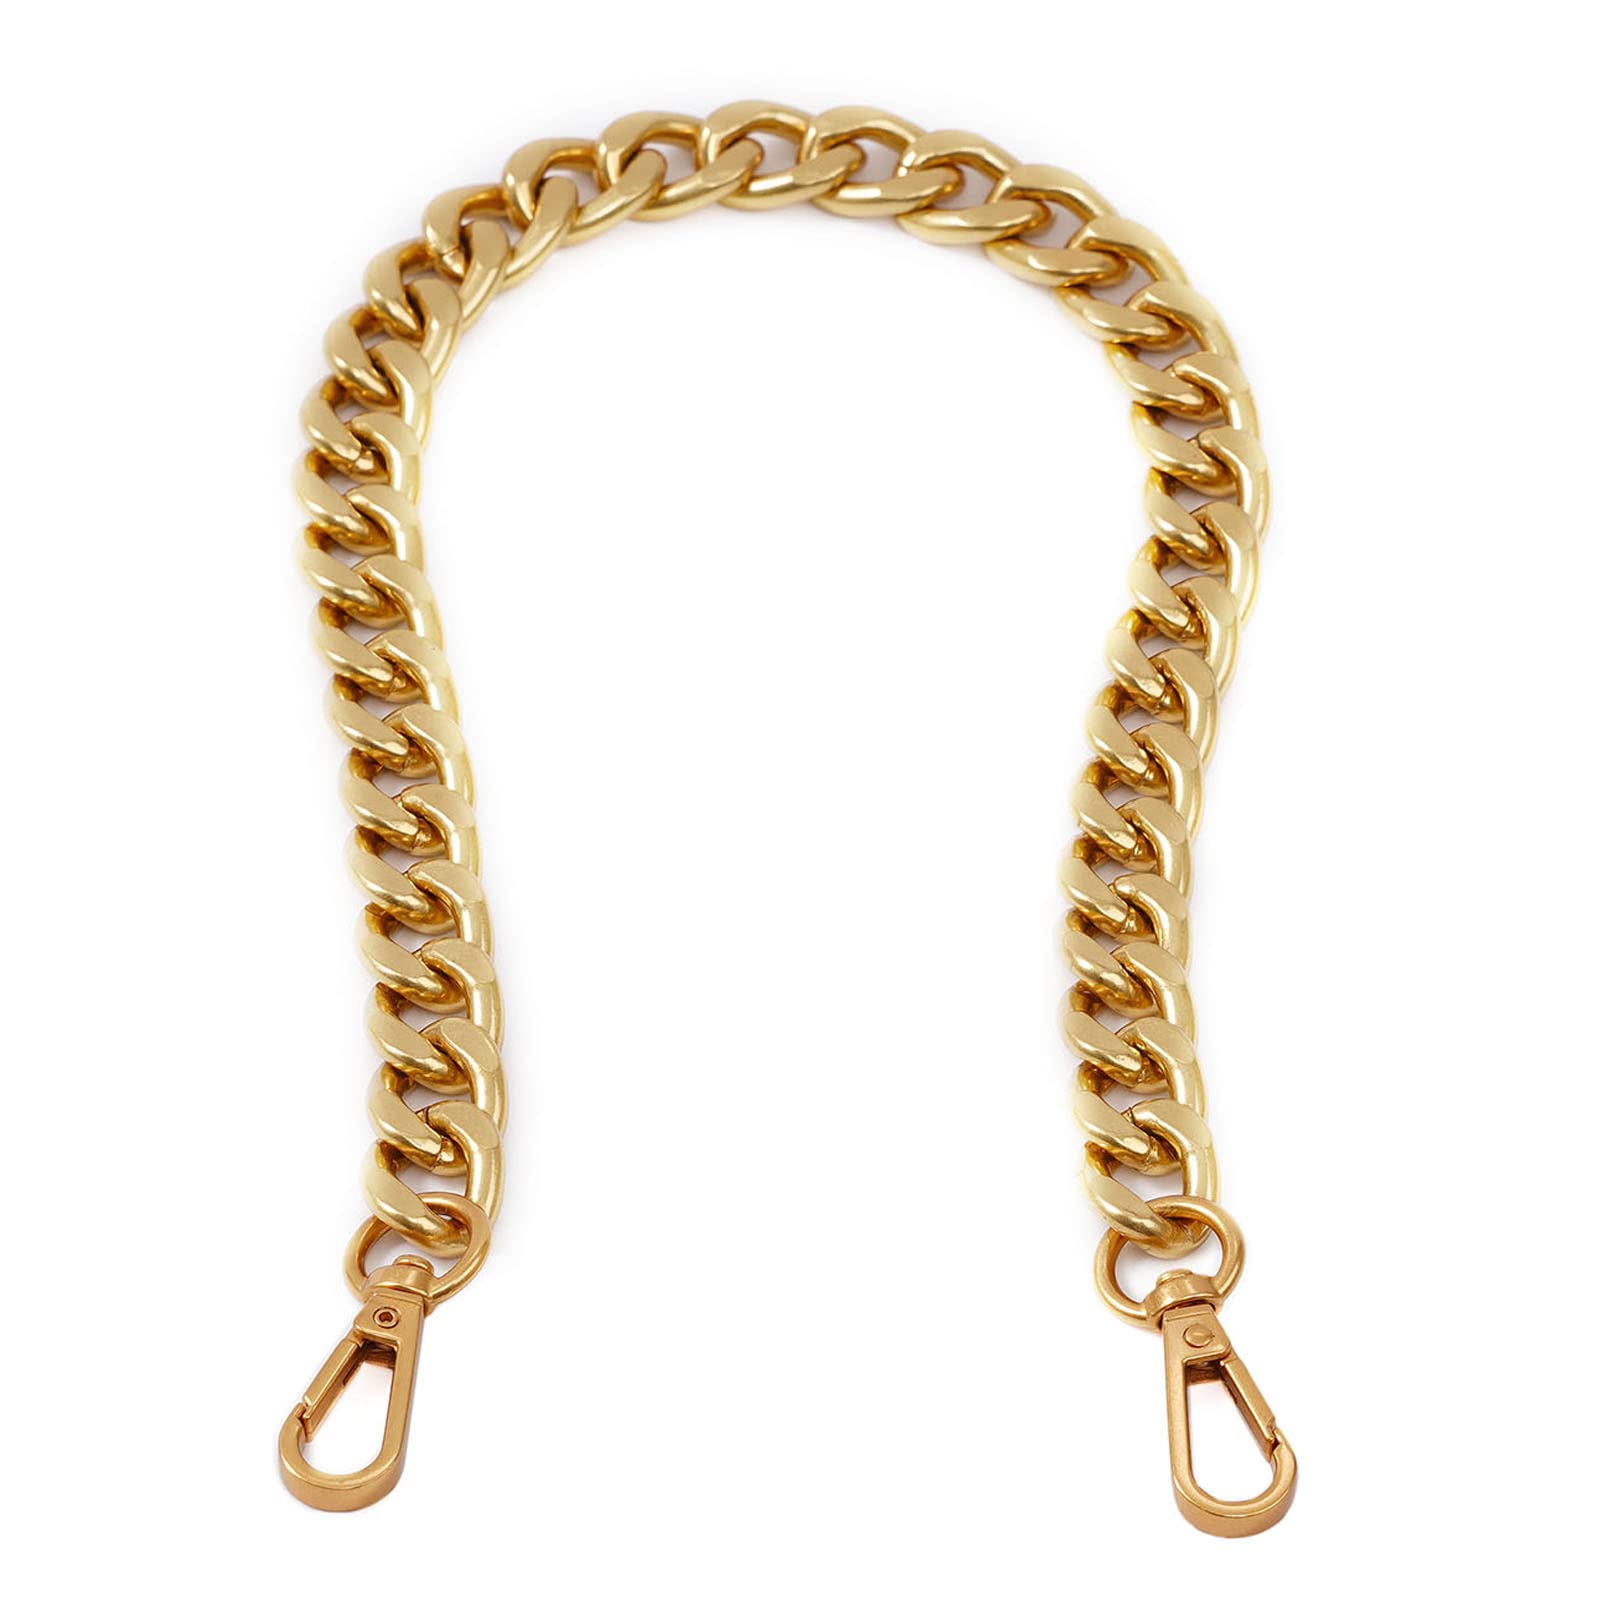 Antique Gold Bag Chain Crossbody Bag Strap Chain Replacement Curb 6mm